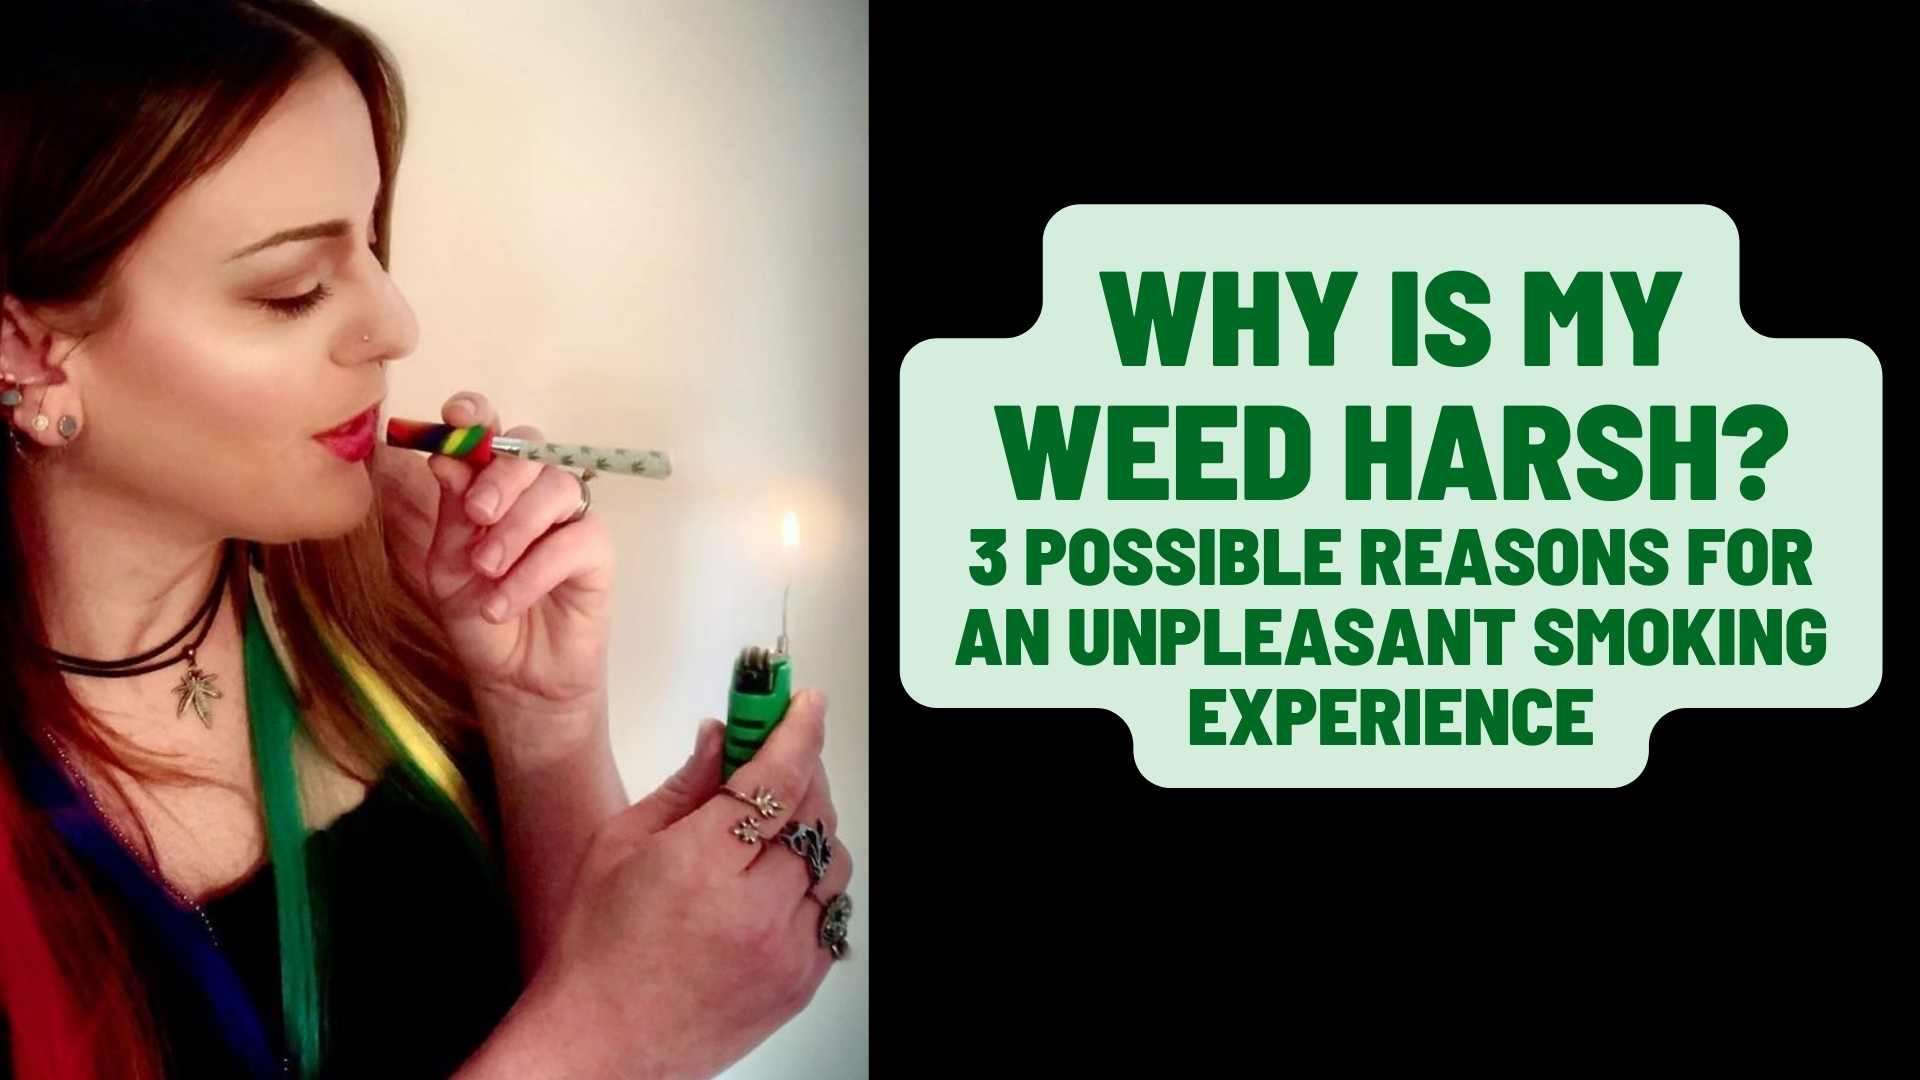 Why Is My Weed Harsh? 3 Possible Reasons for an Unpleasant Smoking Experience